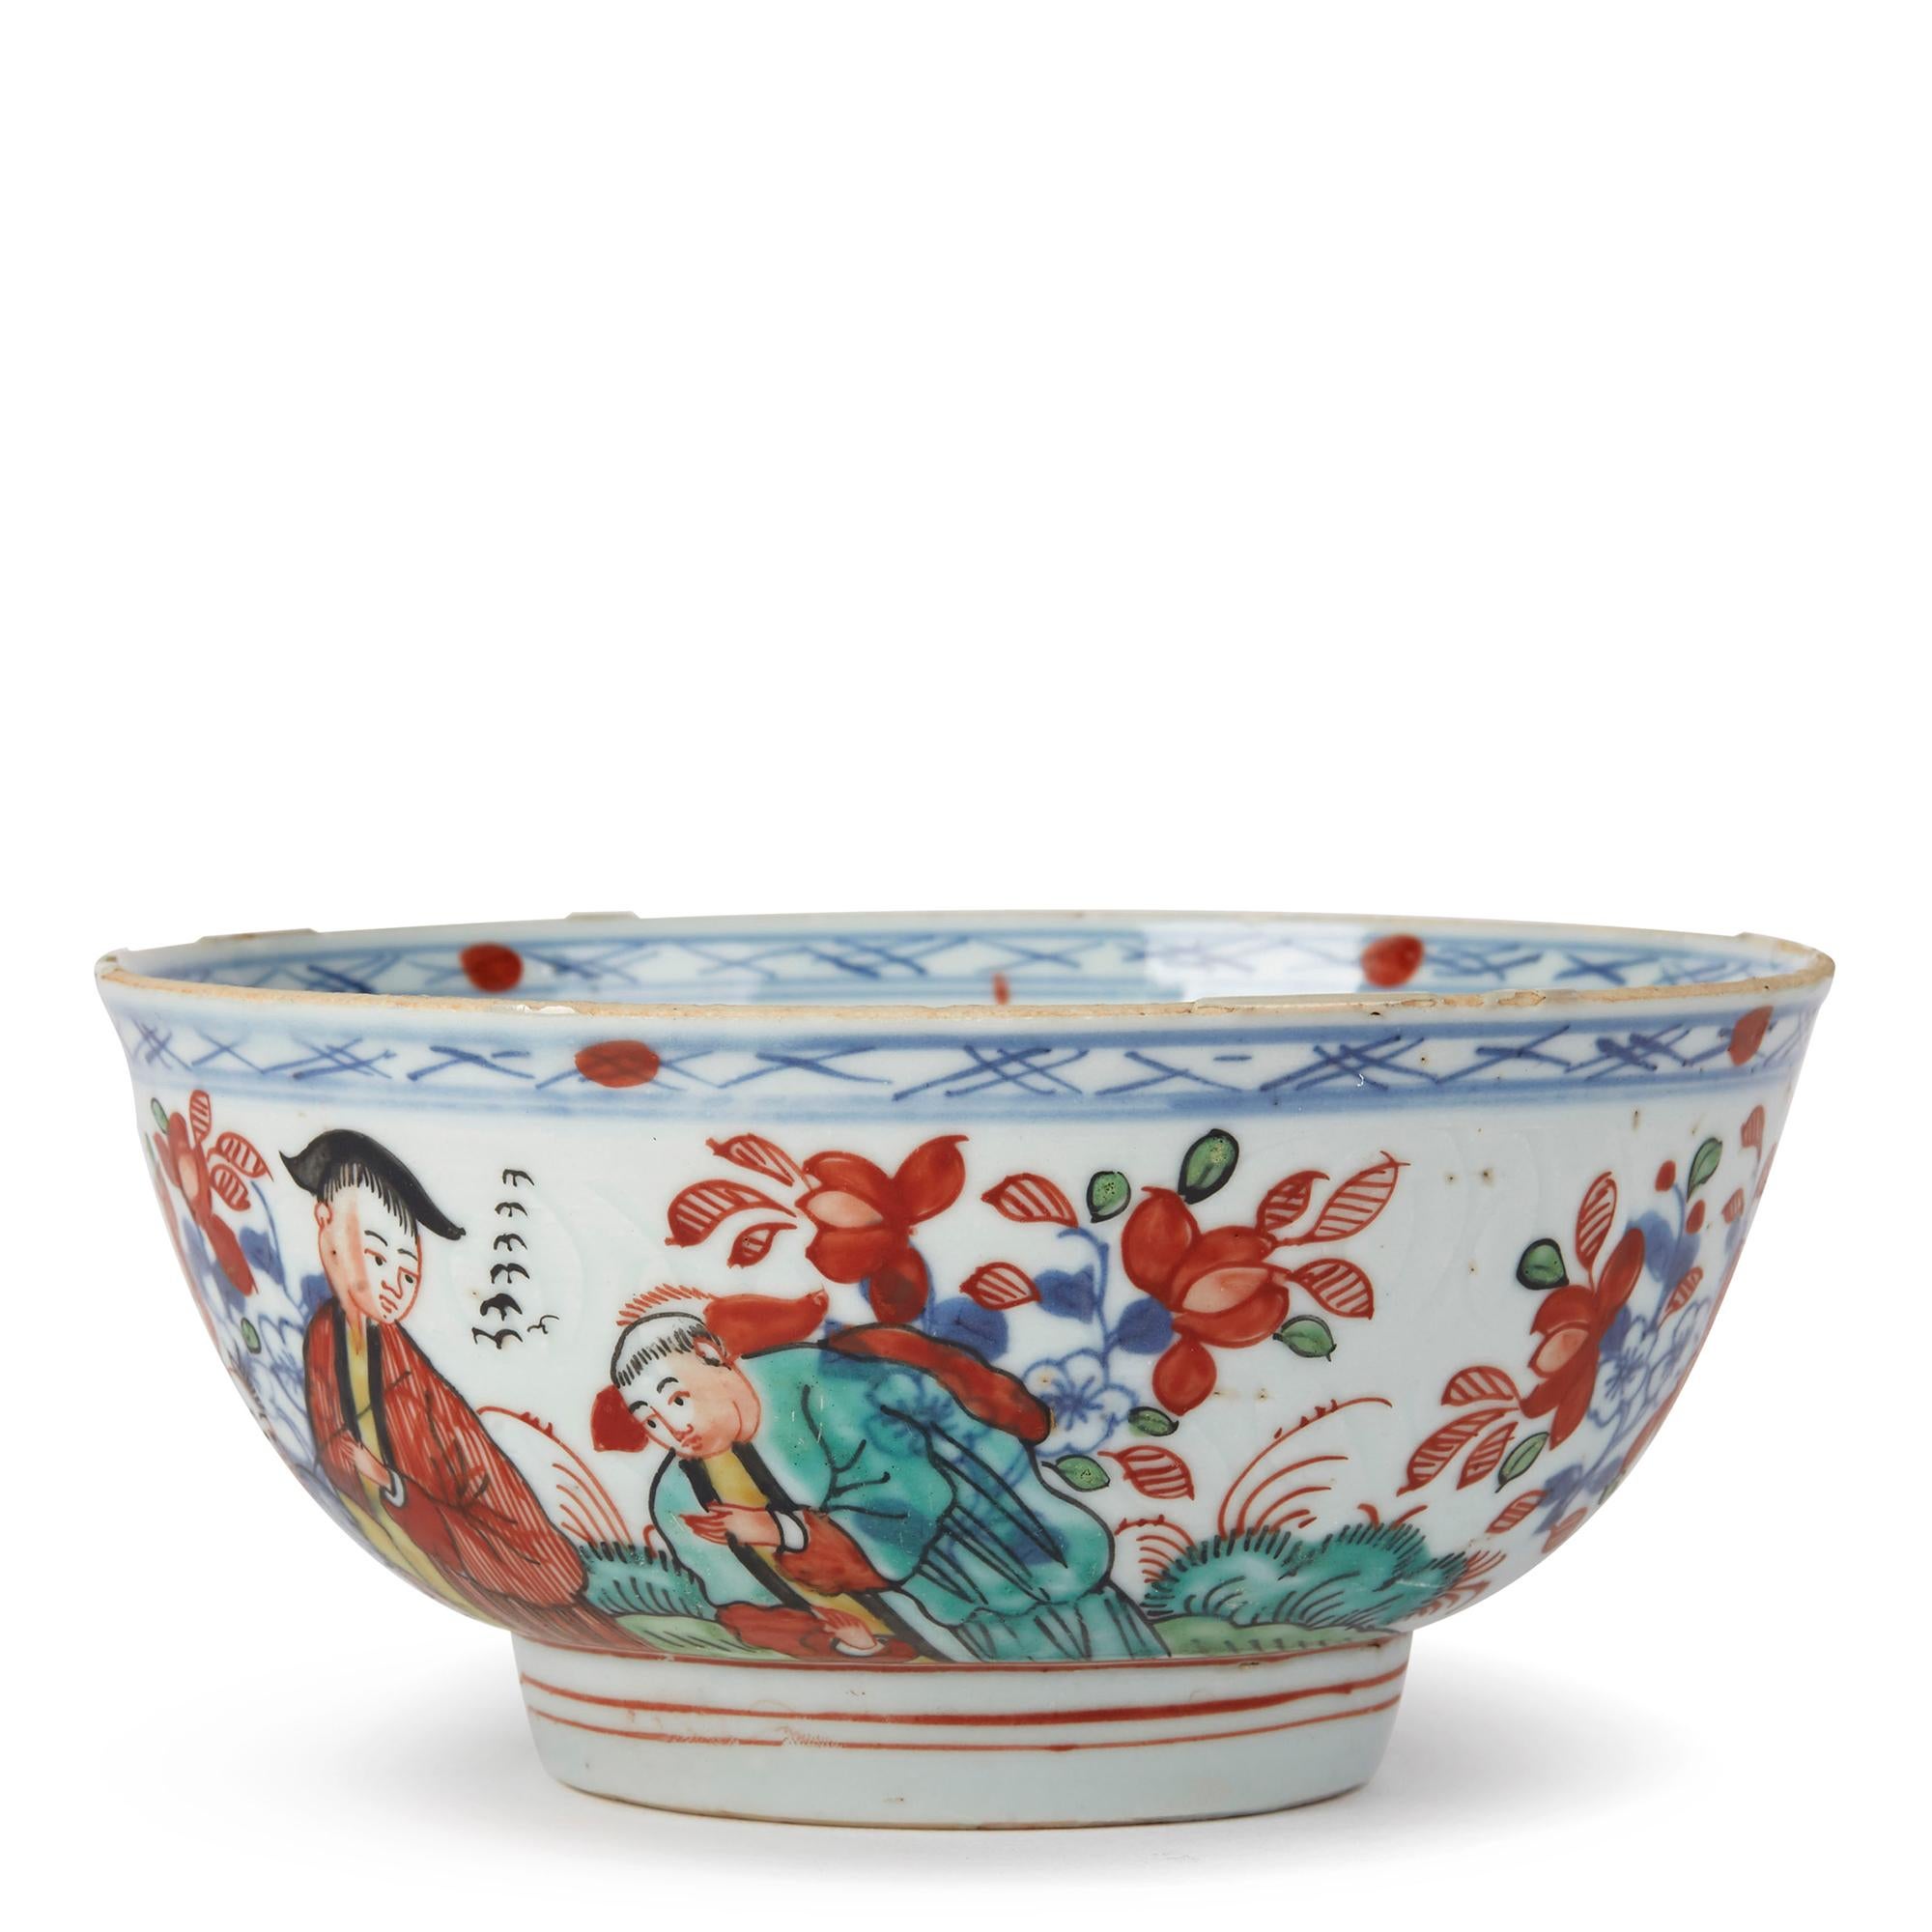 A rare and unusual antique Chinese Qianlong, or earlier, porcelain bowl, probably Dutch decorated with a figure in a red gown with two attendants surrounded by underglaze blue and enameled floral sprigs against an anhua ground, the inner bowl with